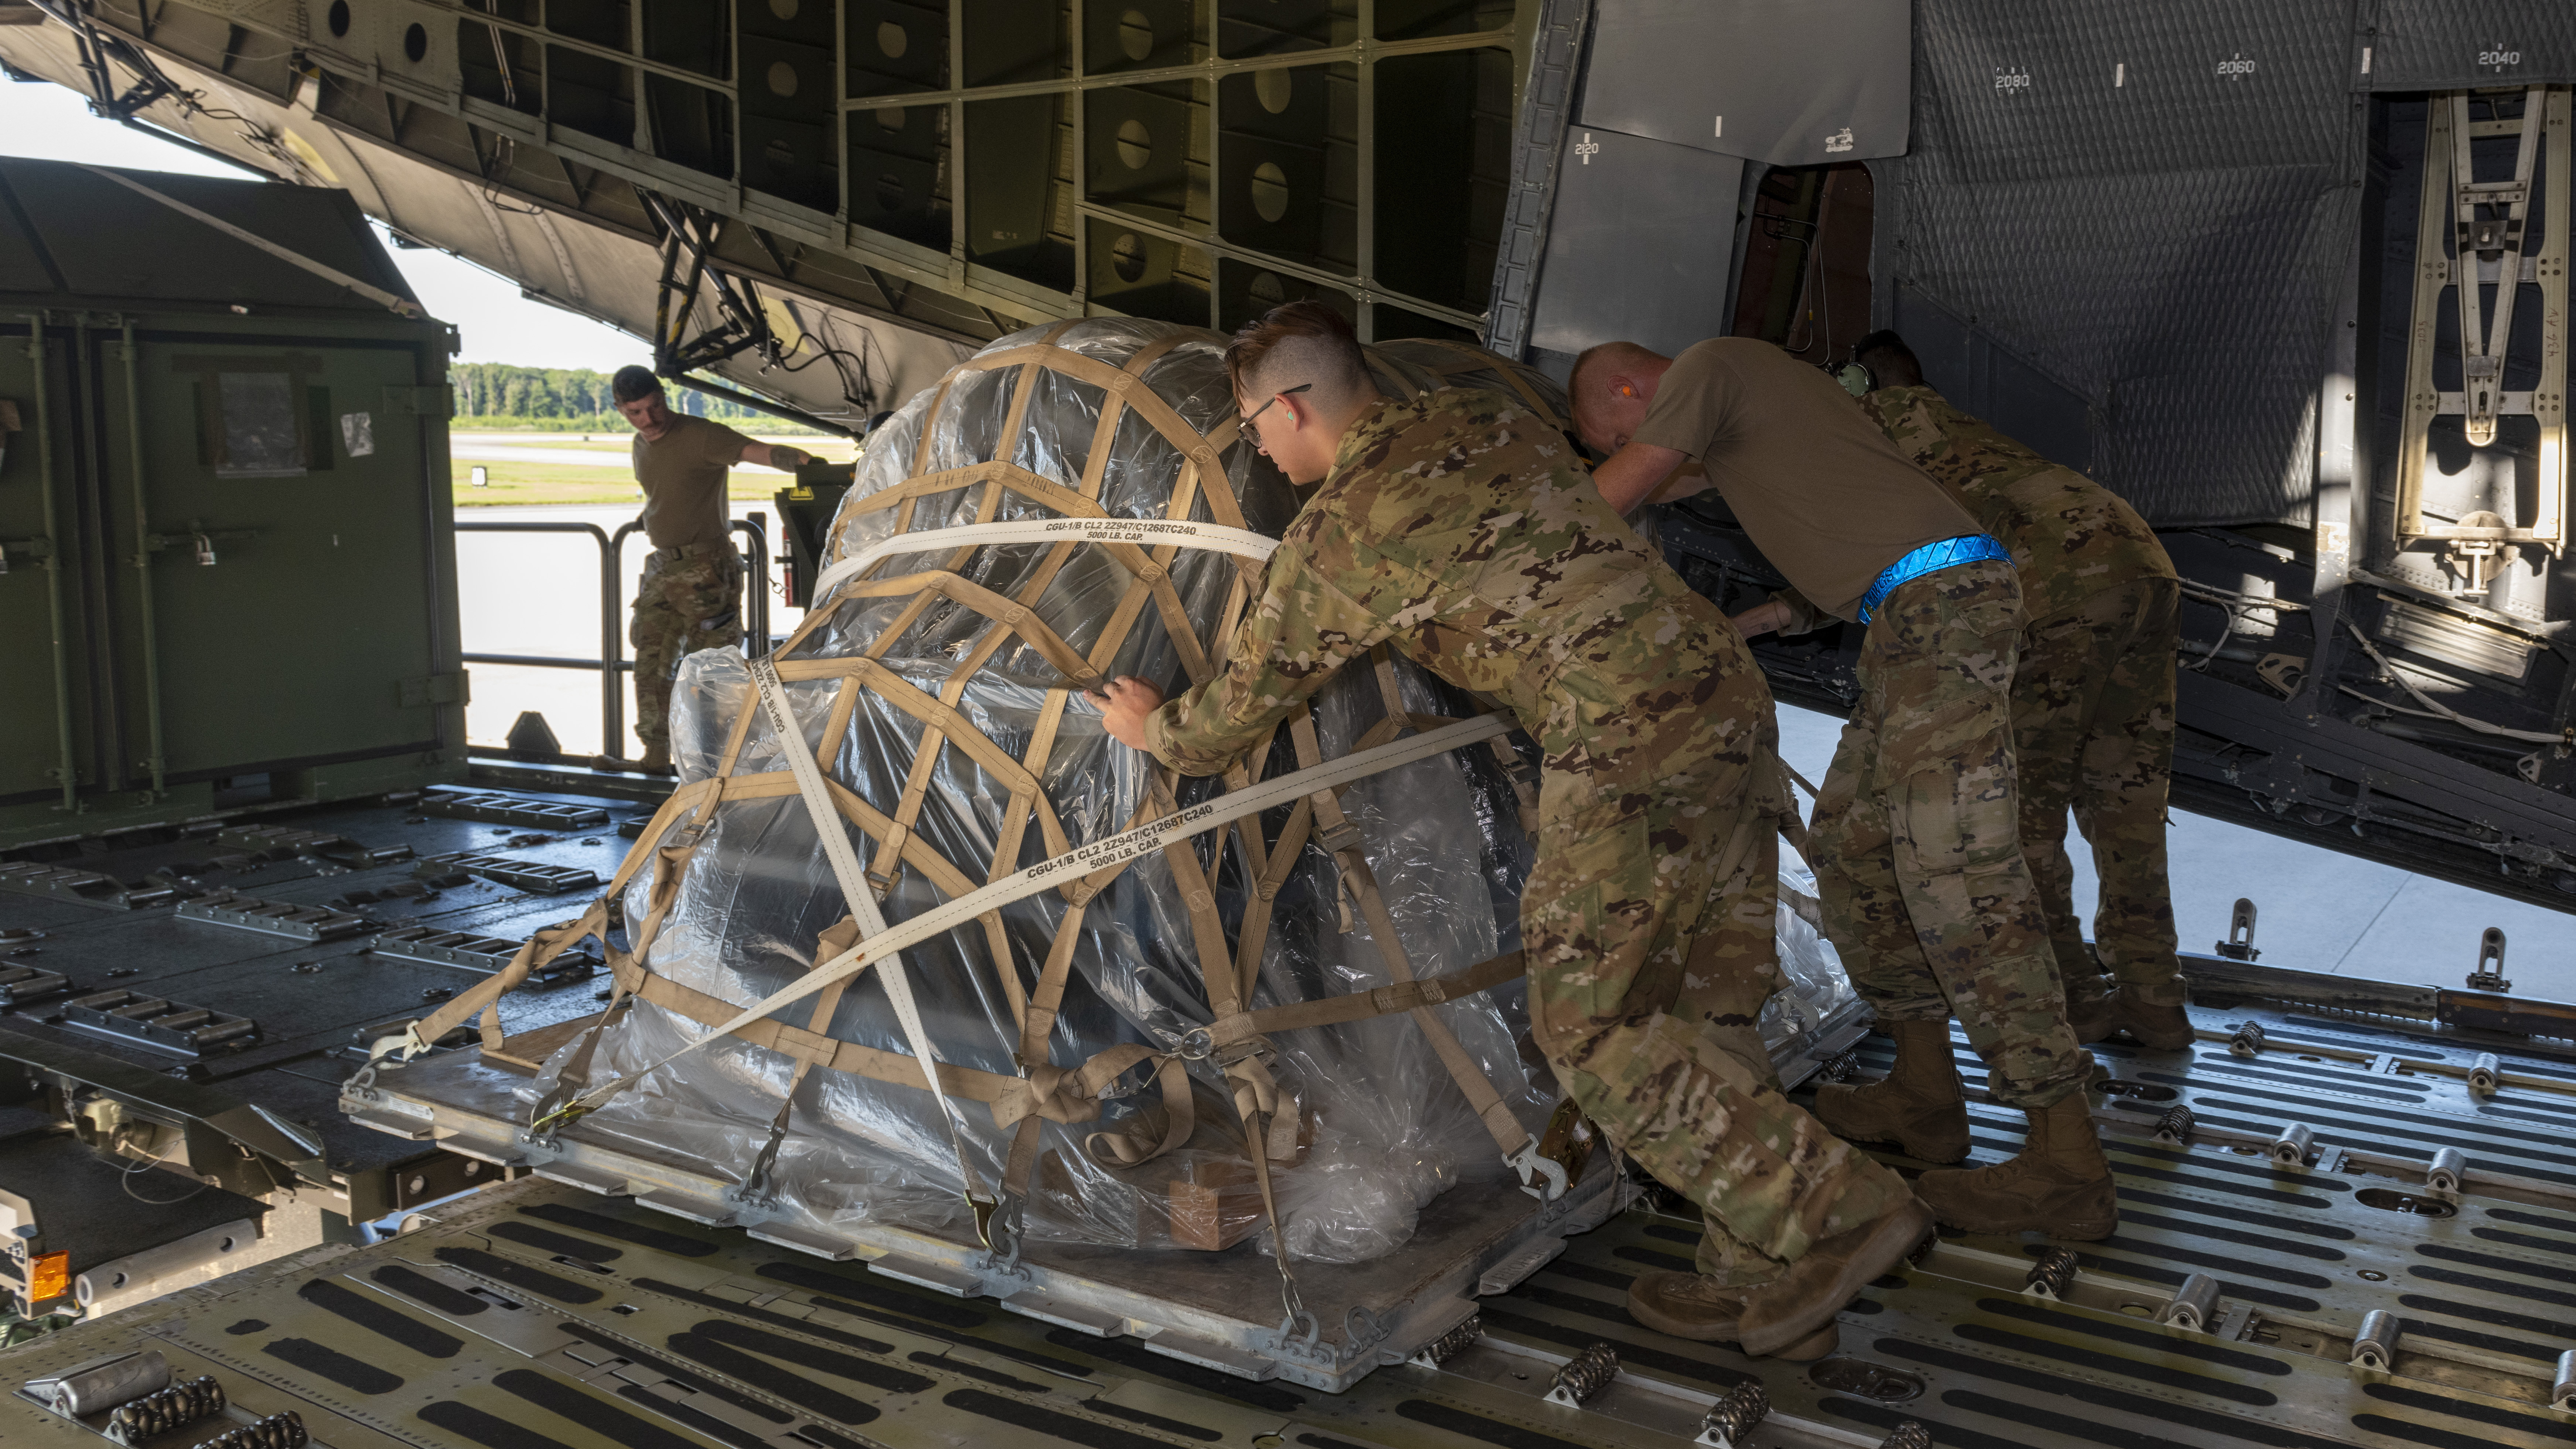 Members from the 9th Airlift Squadron and 436th Aerial Port Squadron push cargo onto a K-loader during the Liberty Eagle Readiness Exercise at Dover Air Force Base, Delaware, July 11, 2022. Members from both the 512th and 436th airlift wings participated in a simulated deployment to a forward operating base, located on Dover AFB, July 11-15, 2022. The purpose of this exercise was to validate the 512th and 436th airlift wings' ability to generate, employ and sustain airpower across the world in a contested and degraded operational environment. (U.S. Air Force photo by Senior Airman Shayna Hodge)